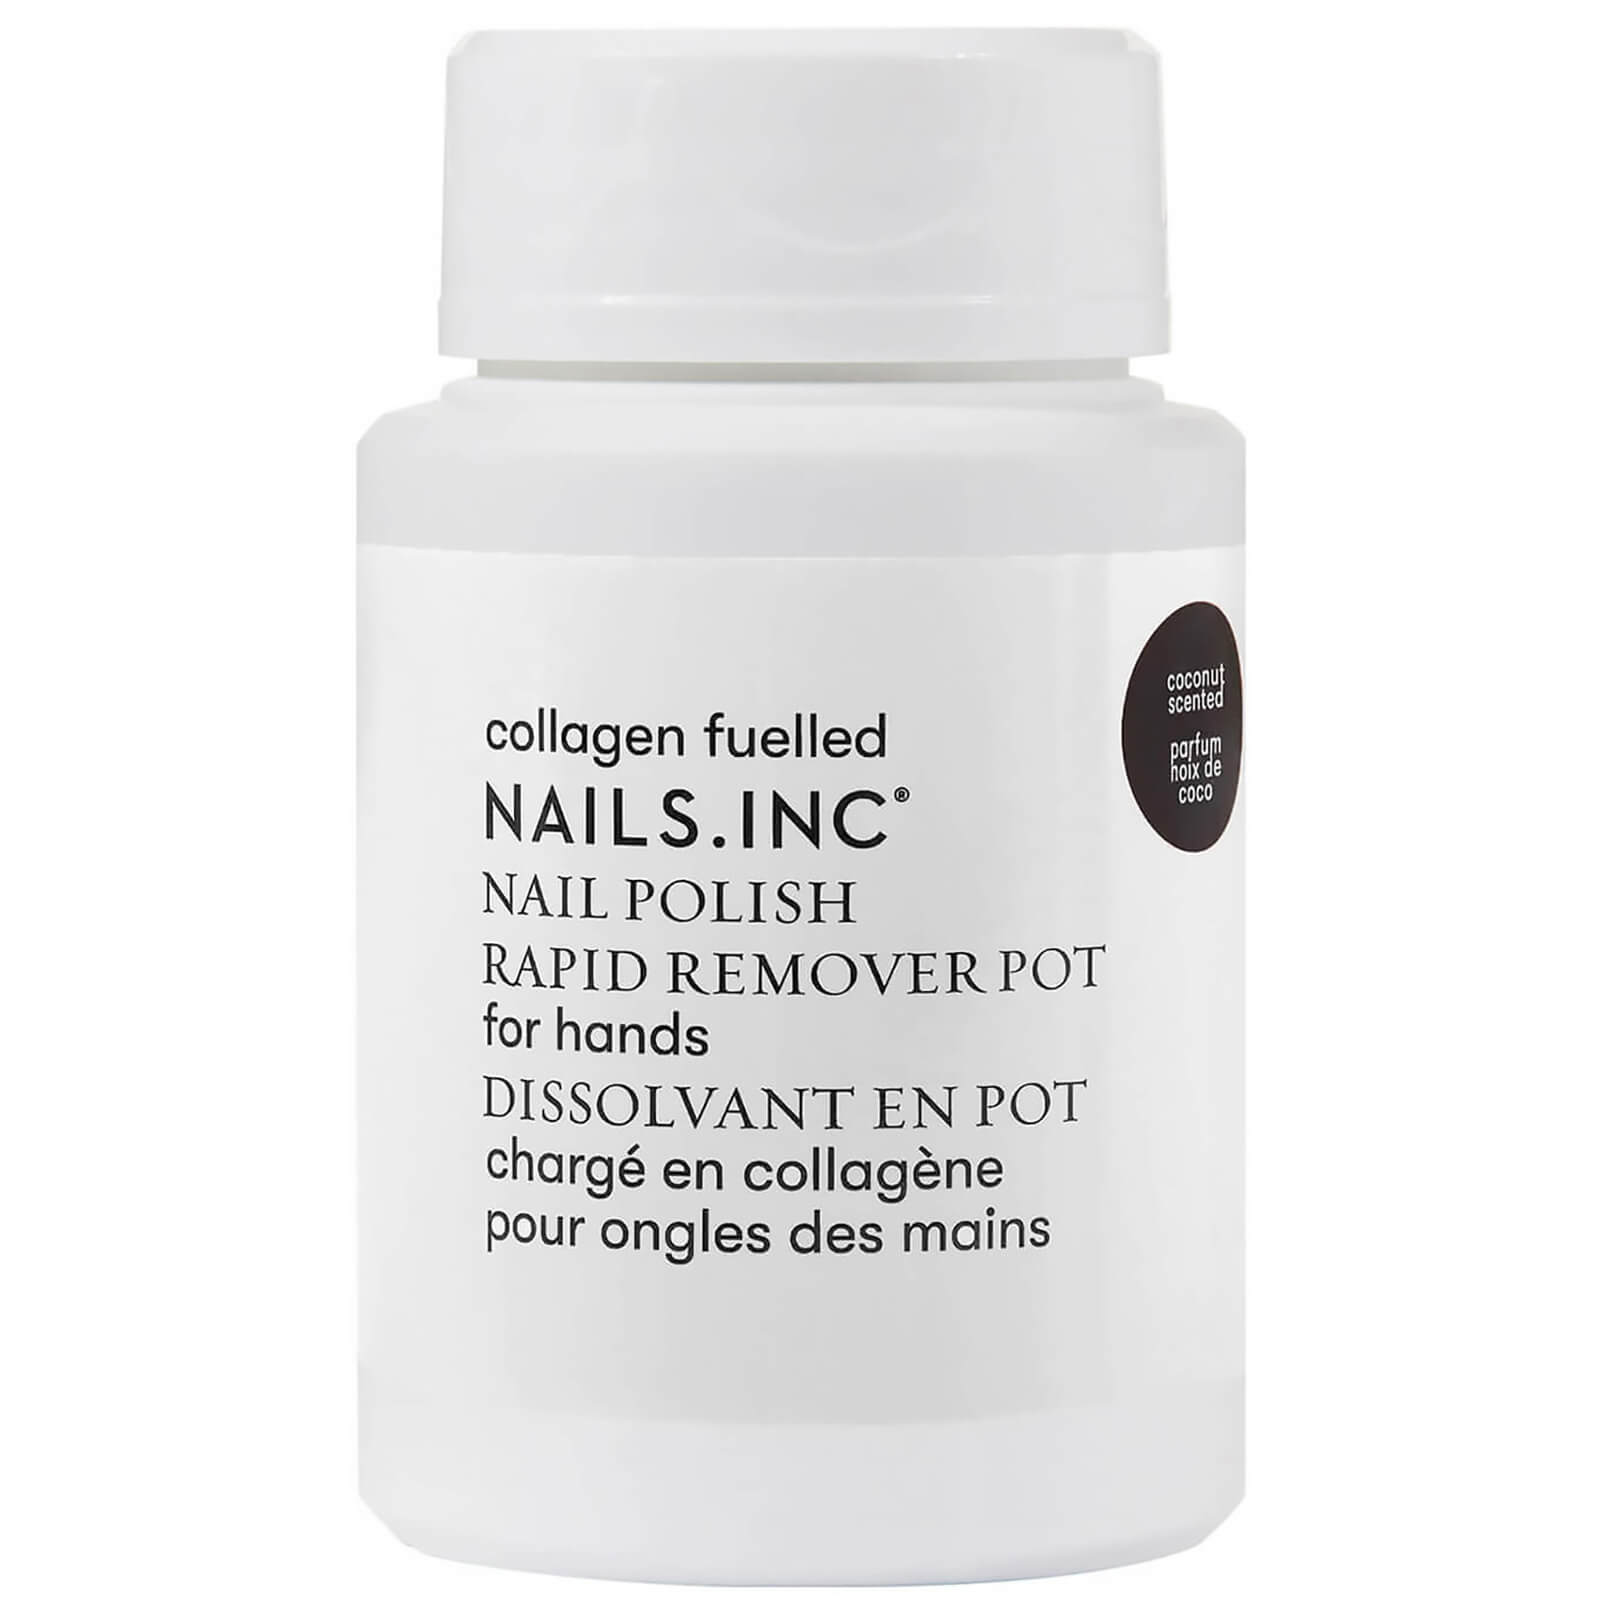 Image of nails inc. Express Nail Polish Remover Pot Powered by Collagen 60ml